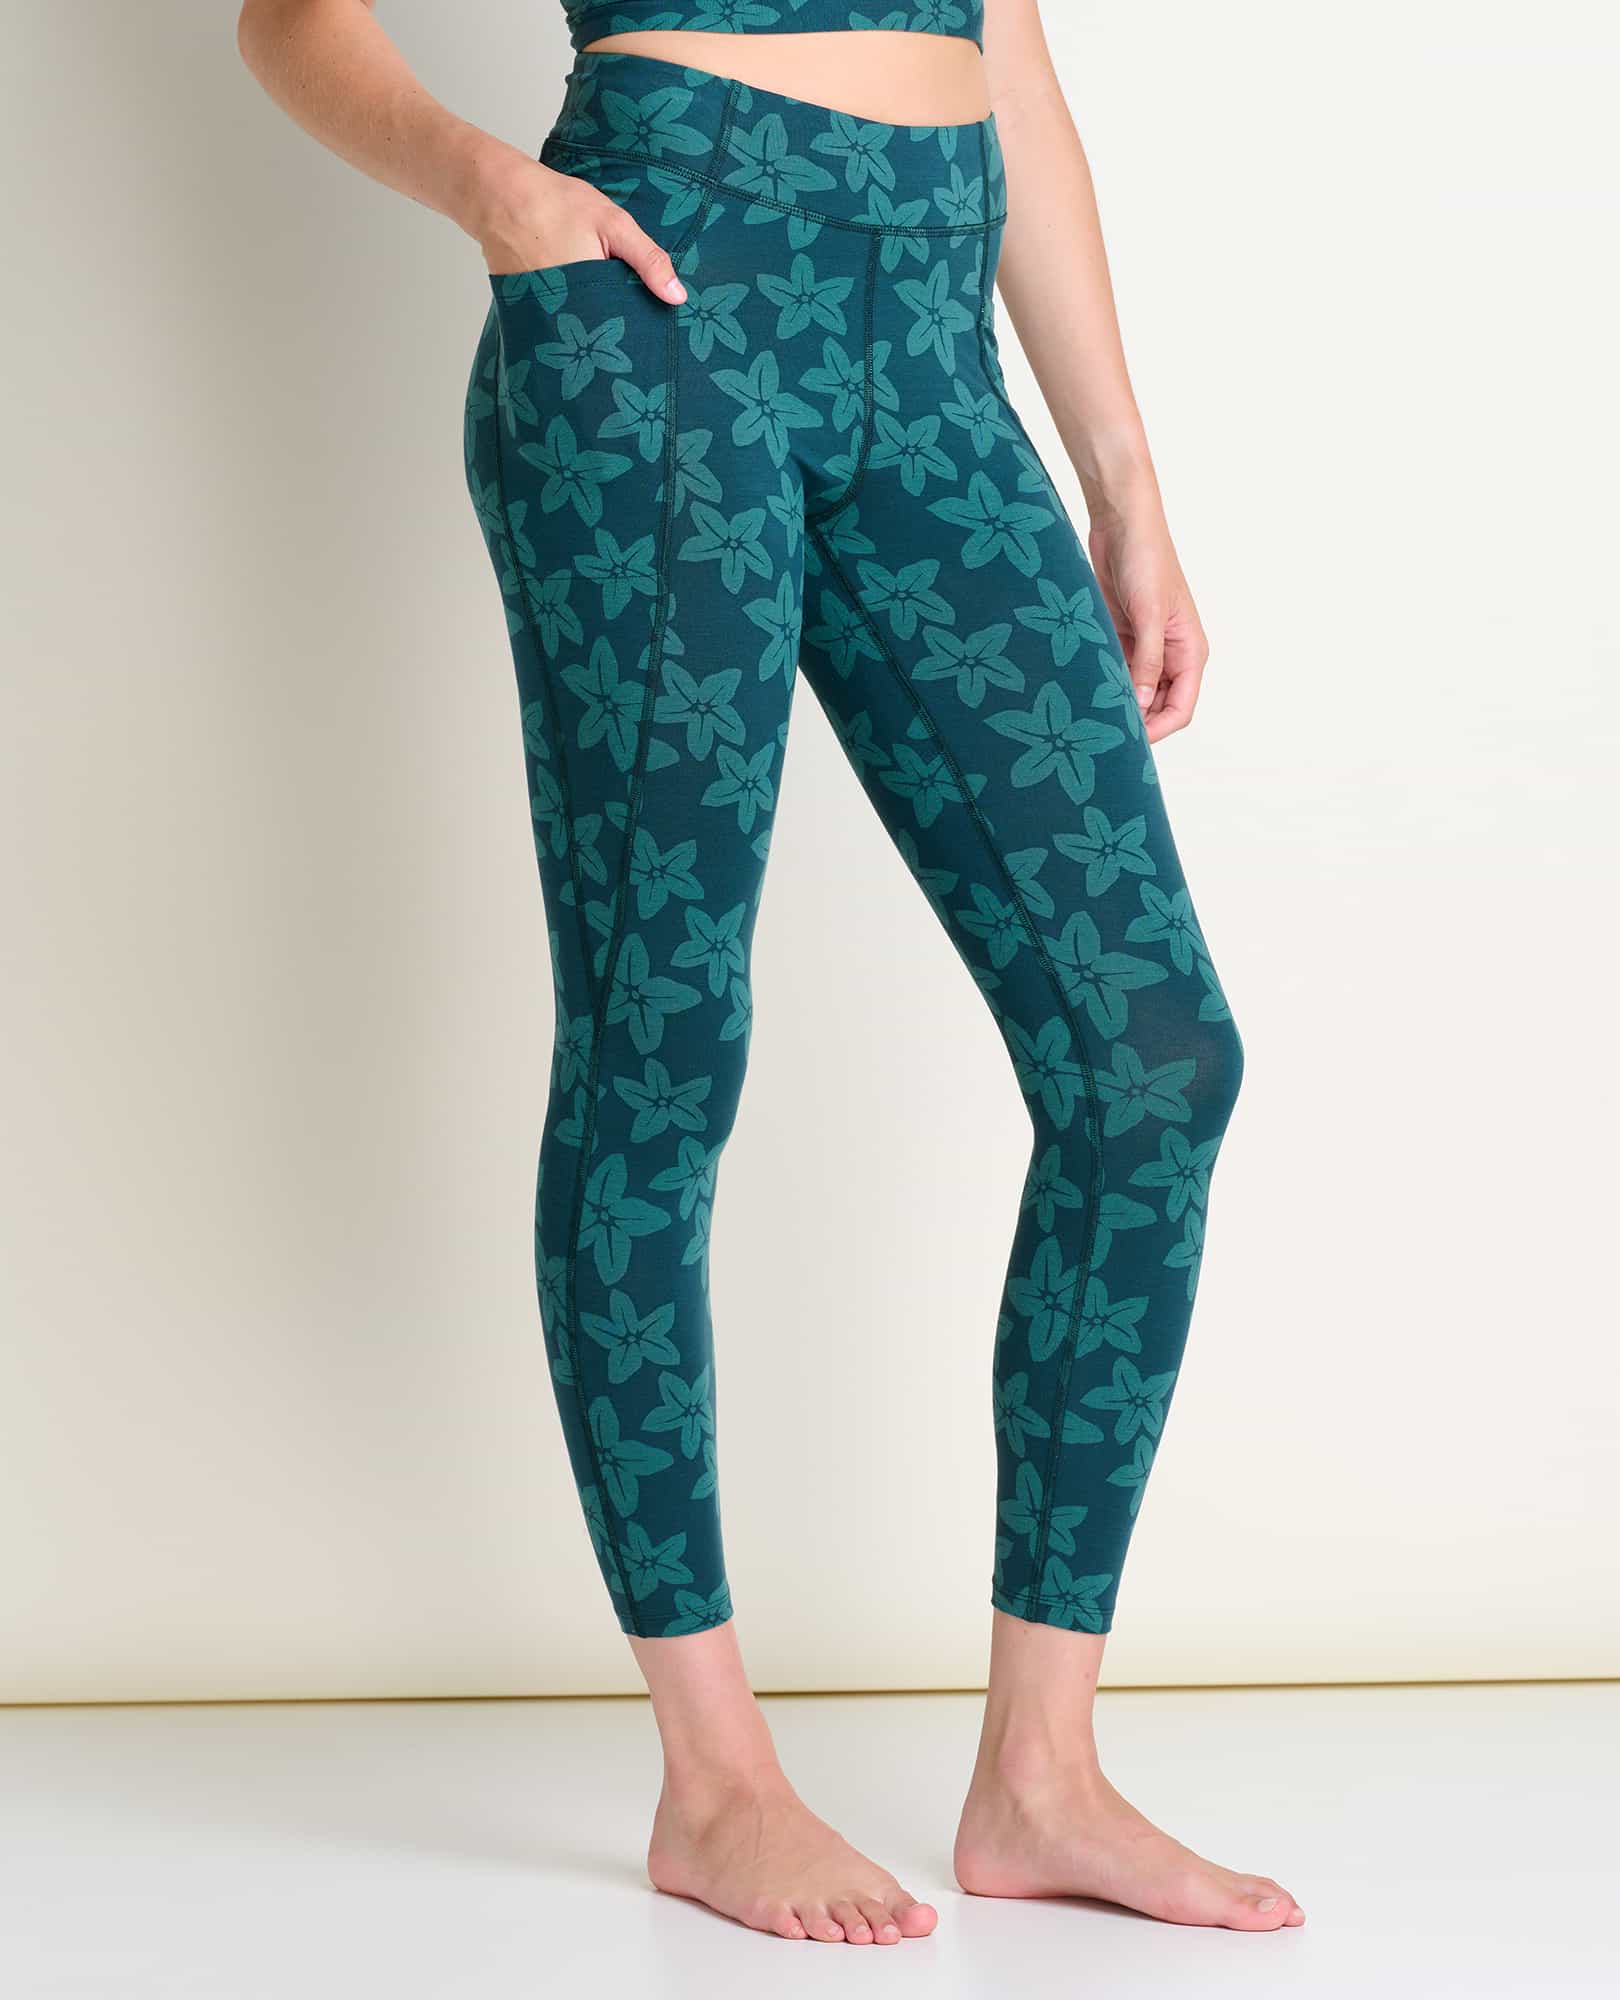 Women's 7/8 yoga leggings made of recycled materials